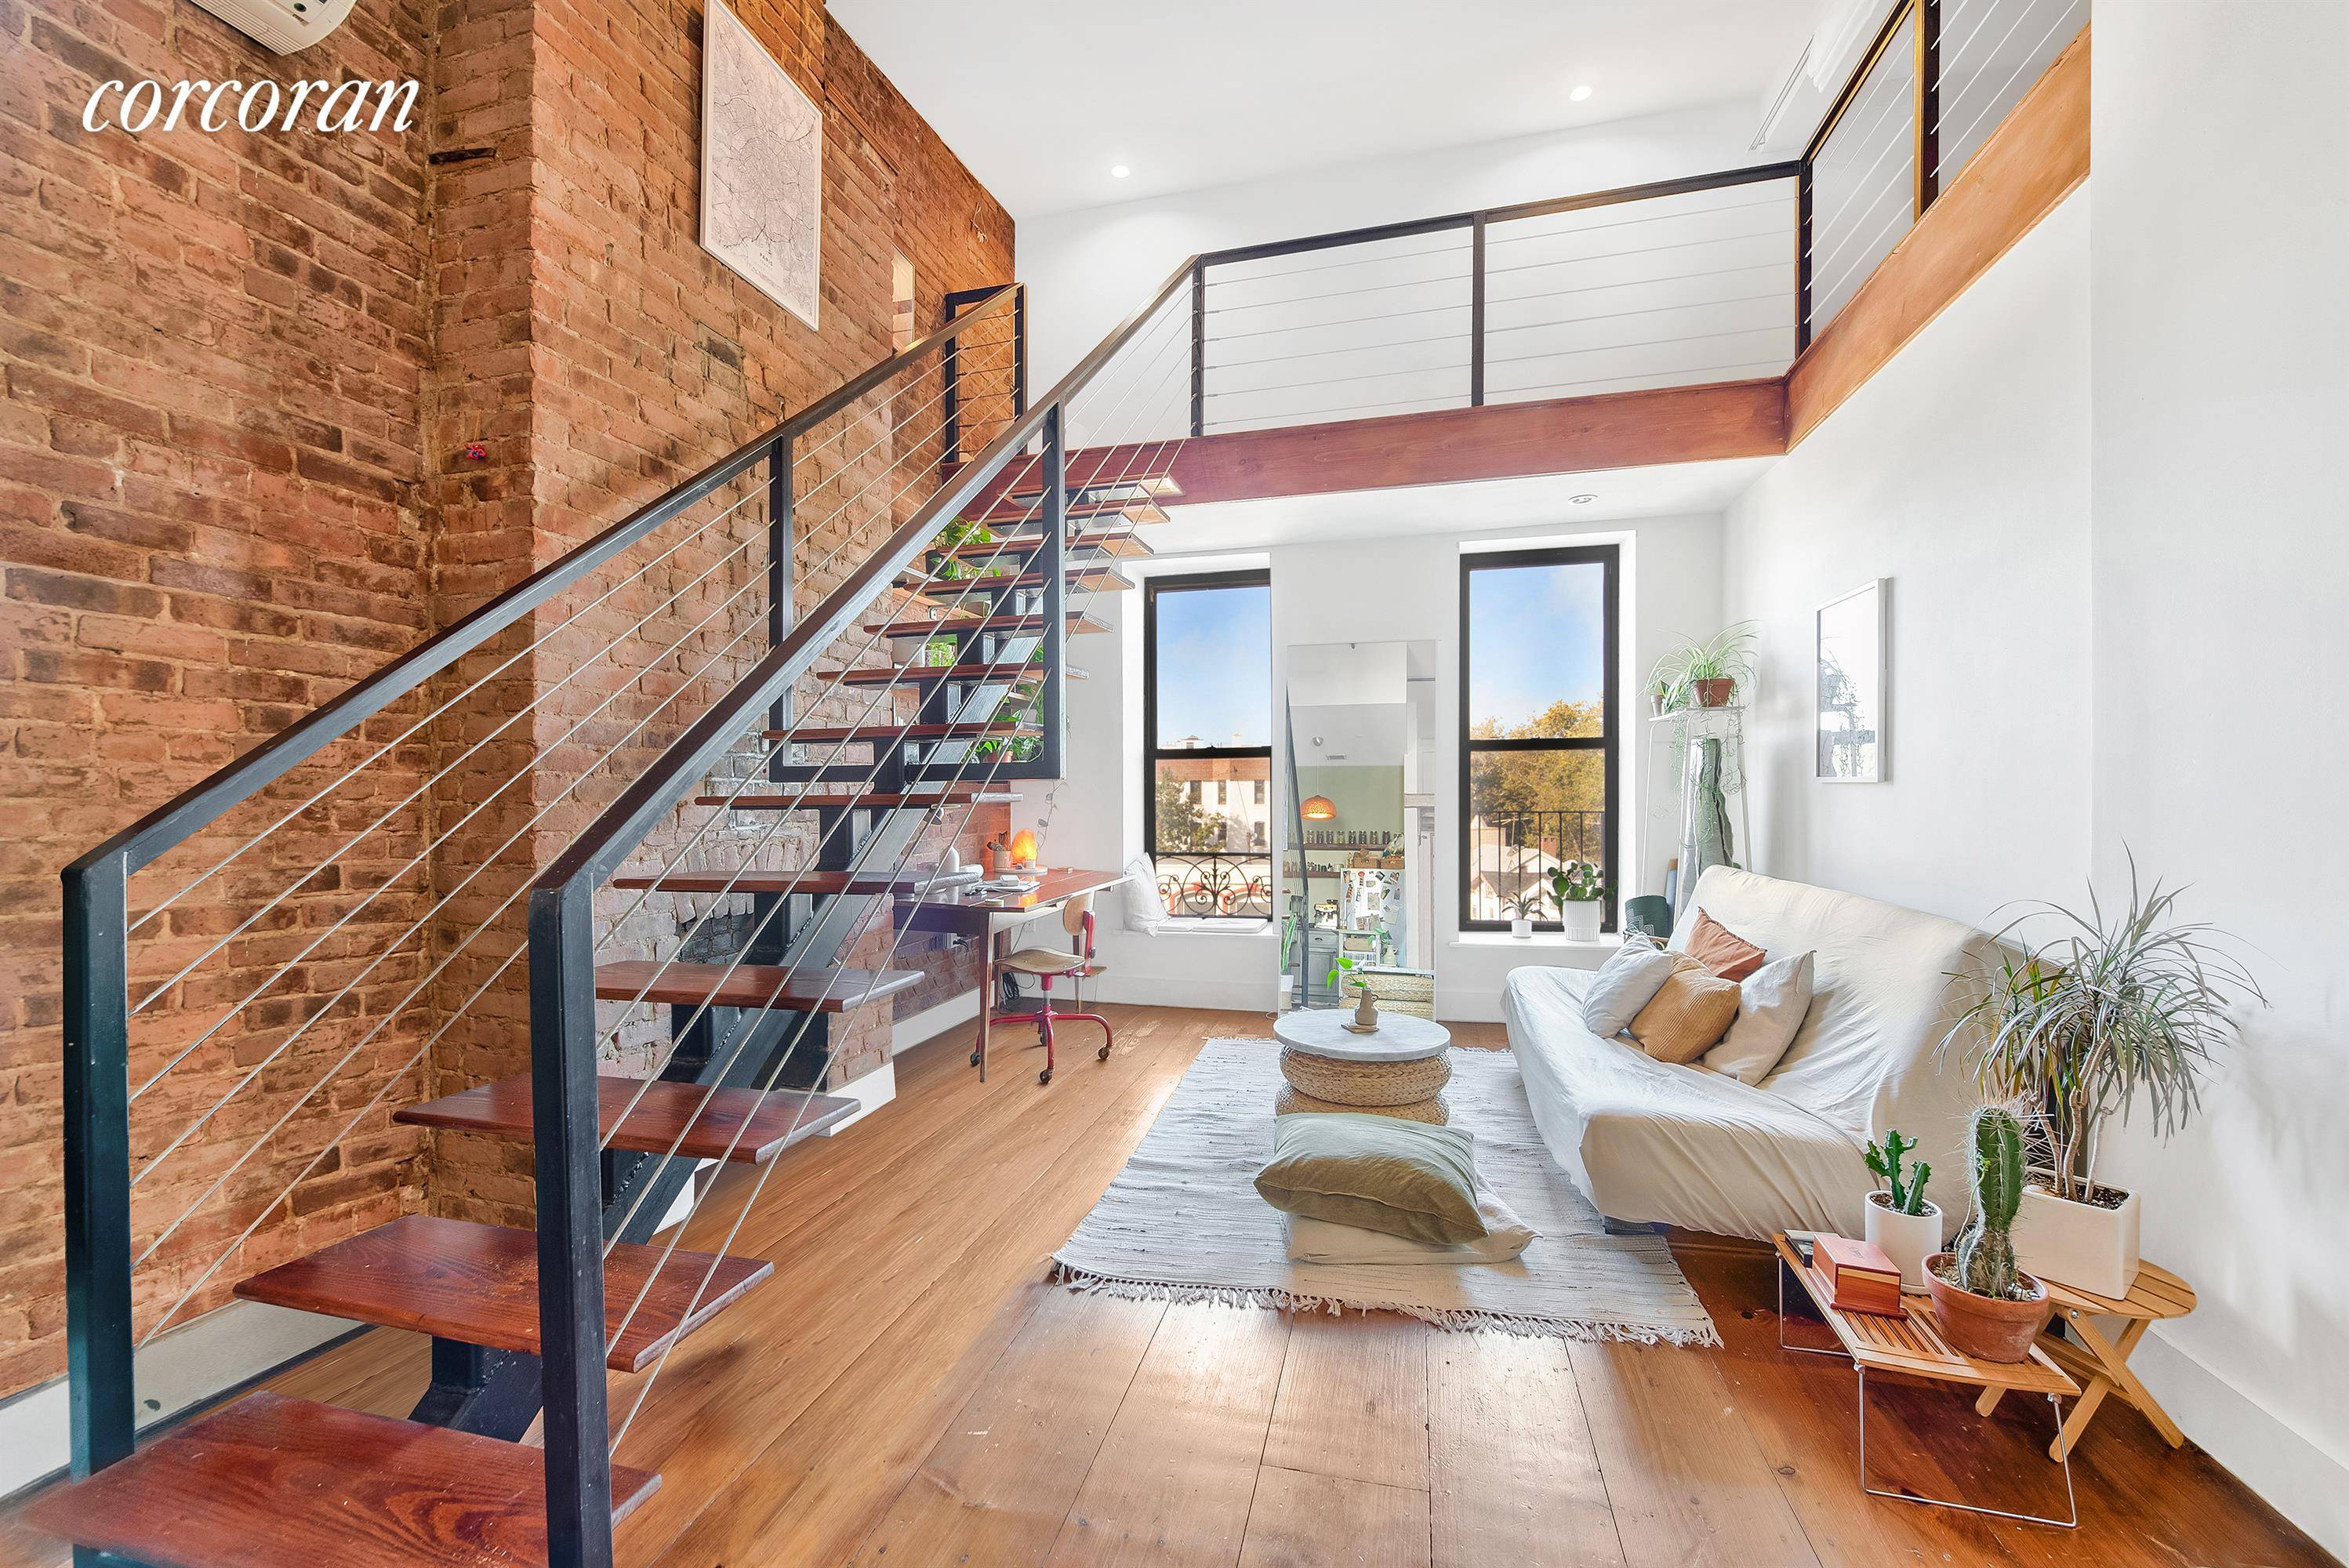 Welcome to the Fulton Street Lofts Penthouse B, a beautiful loft in the heart of Clinton Hill.